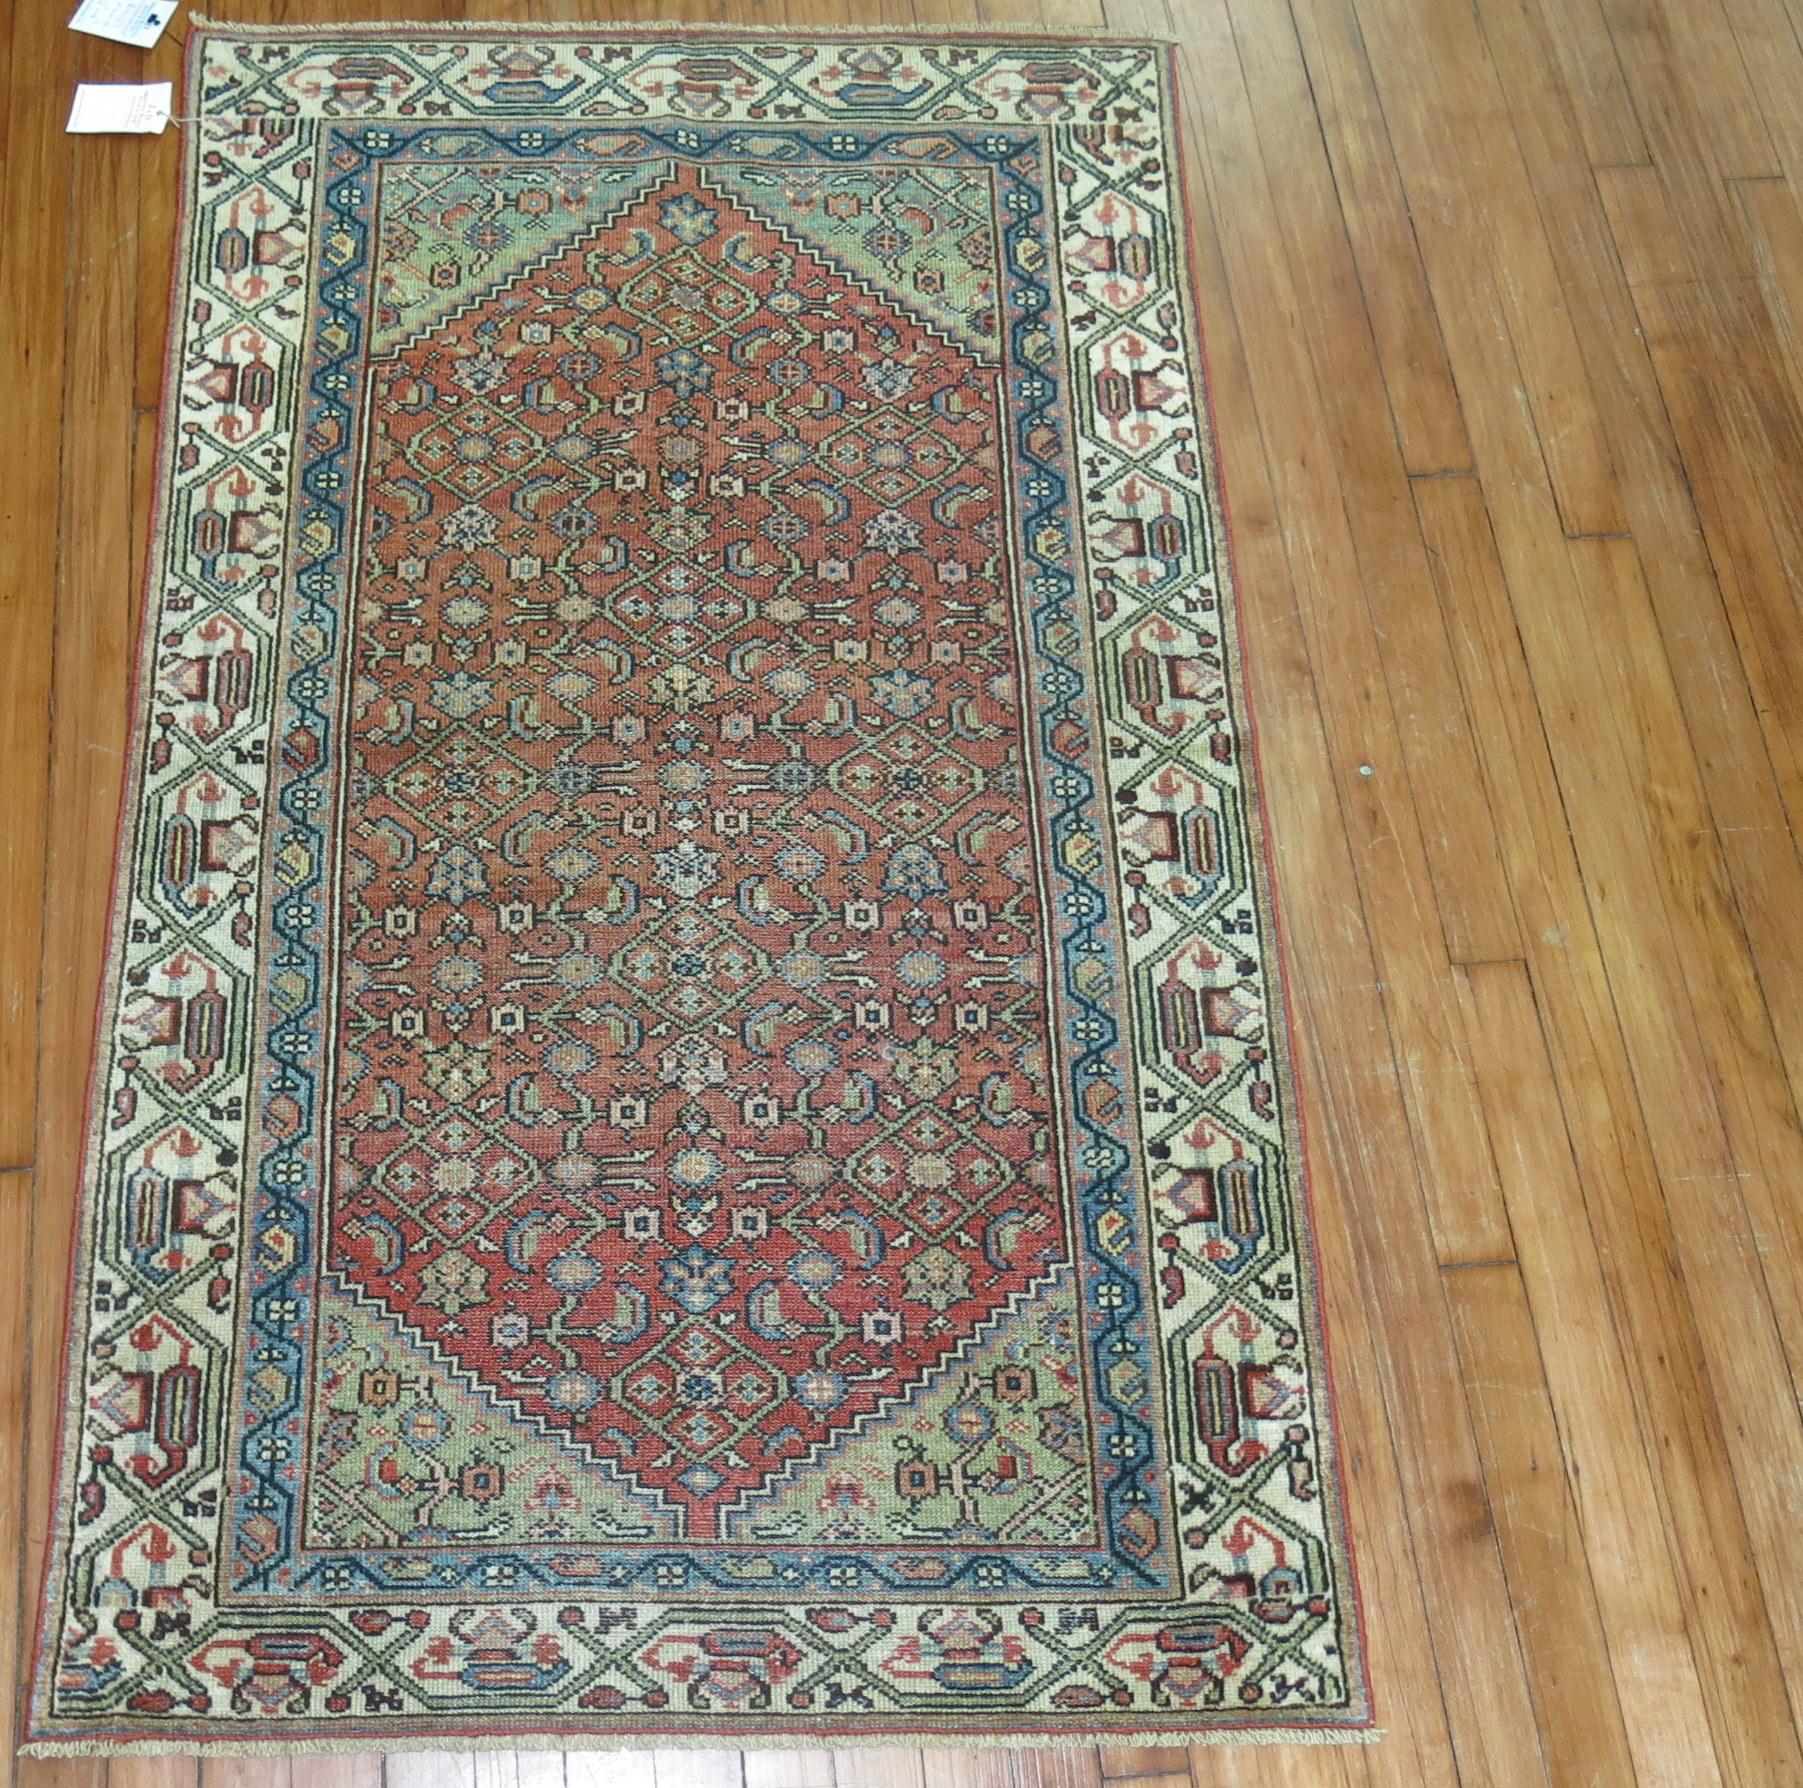 One of a kind Persian Malayer throw size rug with a classic 4 corner herati design motif on a rust colored ground, accents in green, blue and ivory,

circa 1920, measures: 2'11